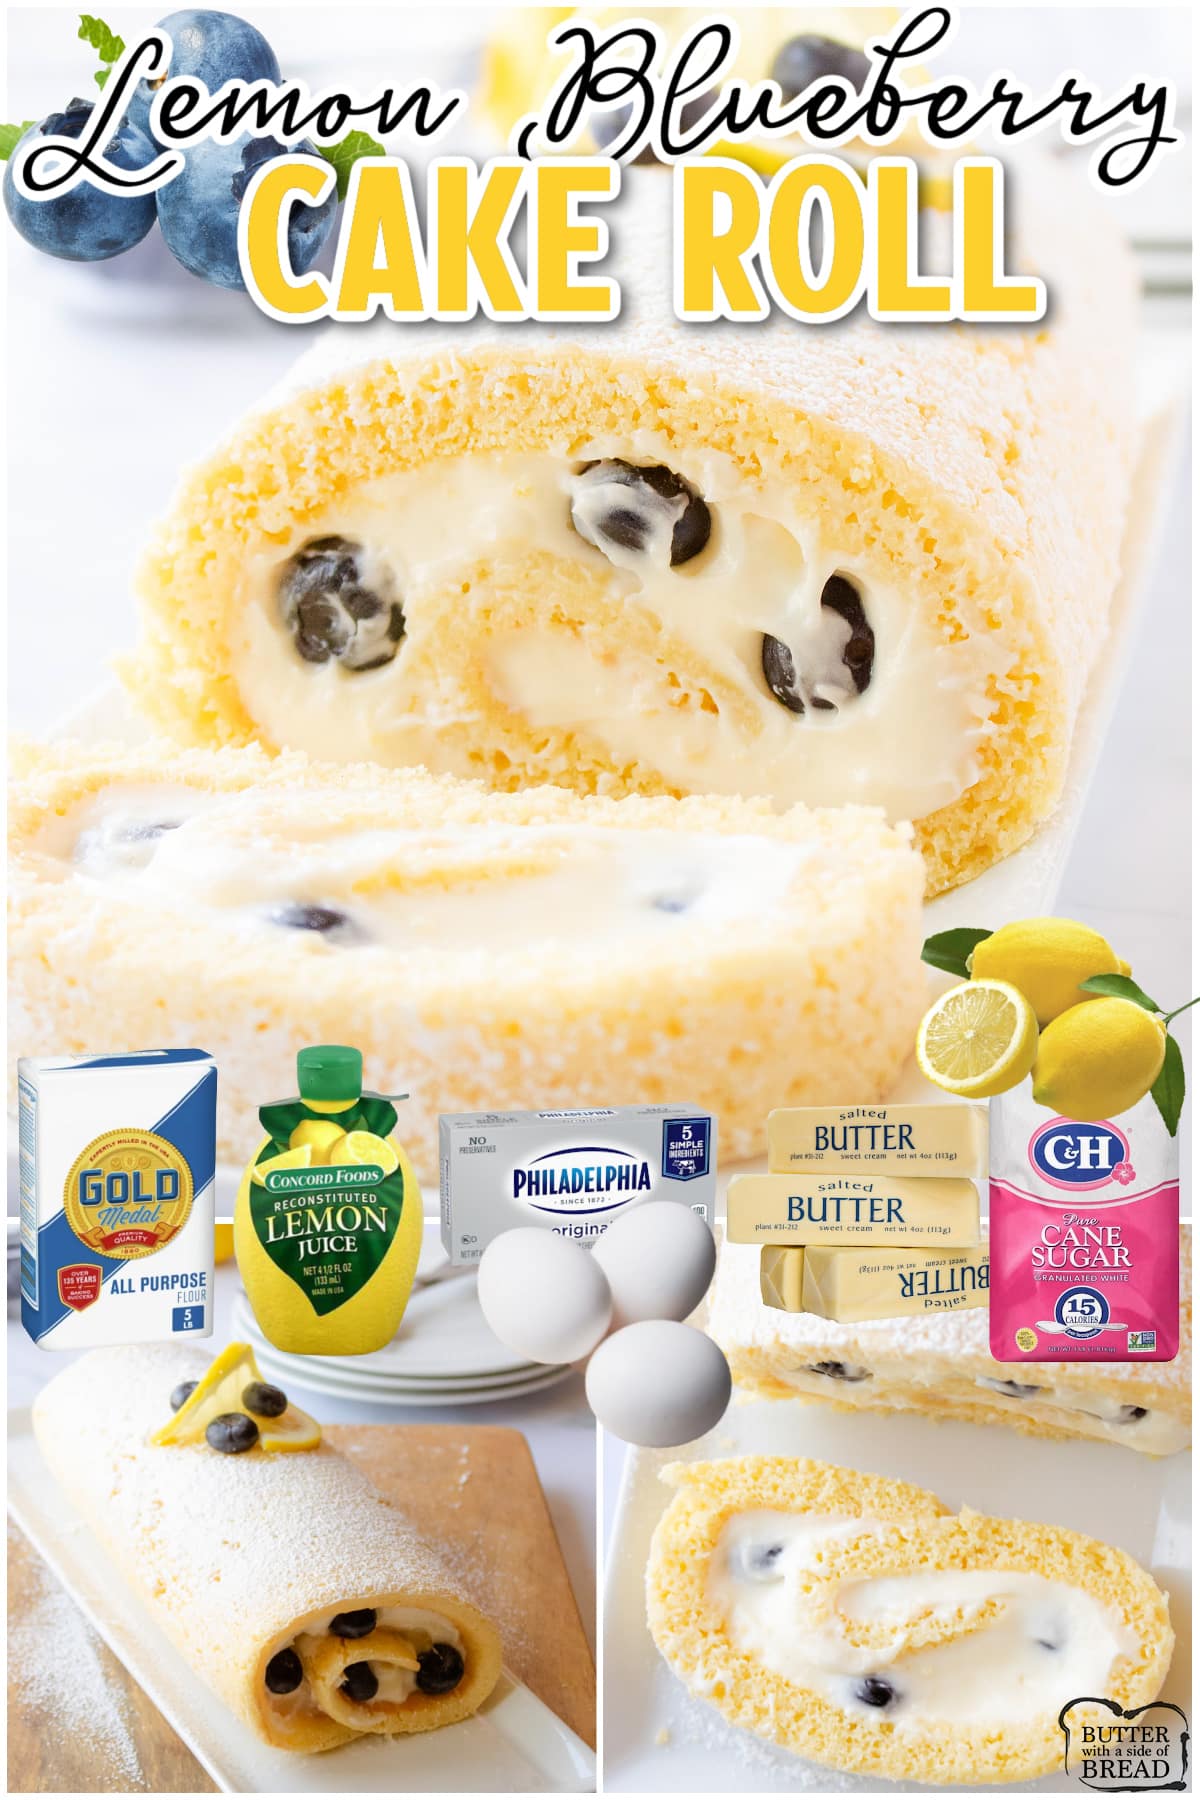 Lemon Blueberry Cake Roll made with classic ingredients & rolled to perfection with layers of sweet cream, lemon cake & fresh blueberries! Homemade Swiss roll cake bursting with fresh Spring flavors!